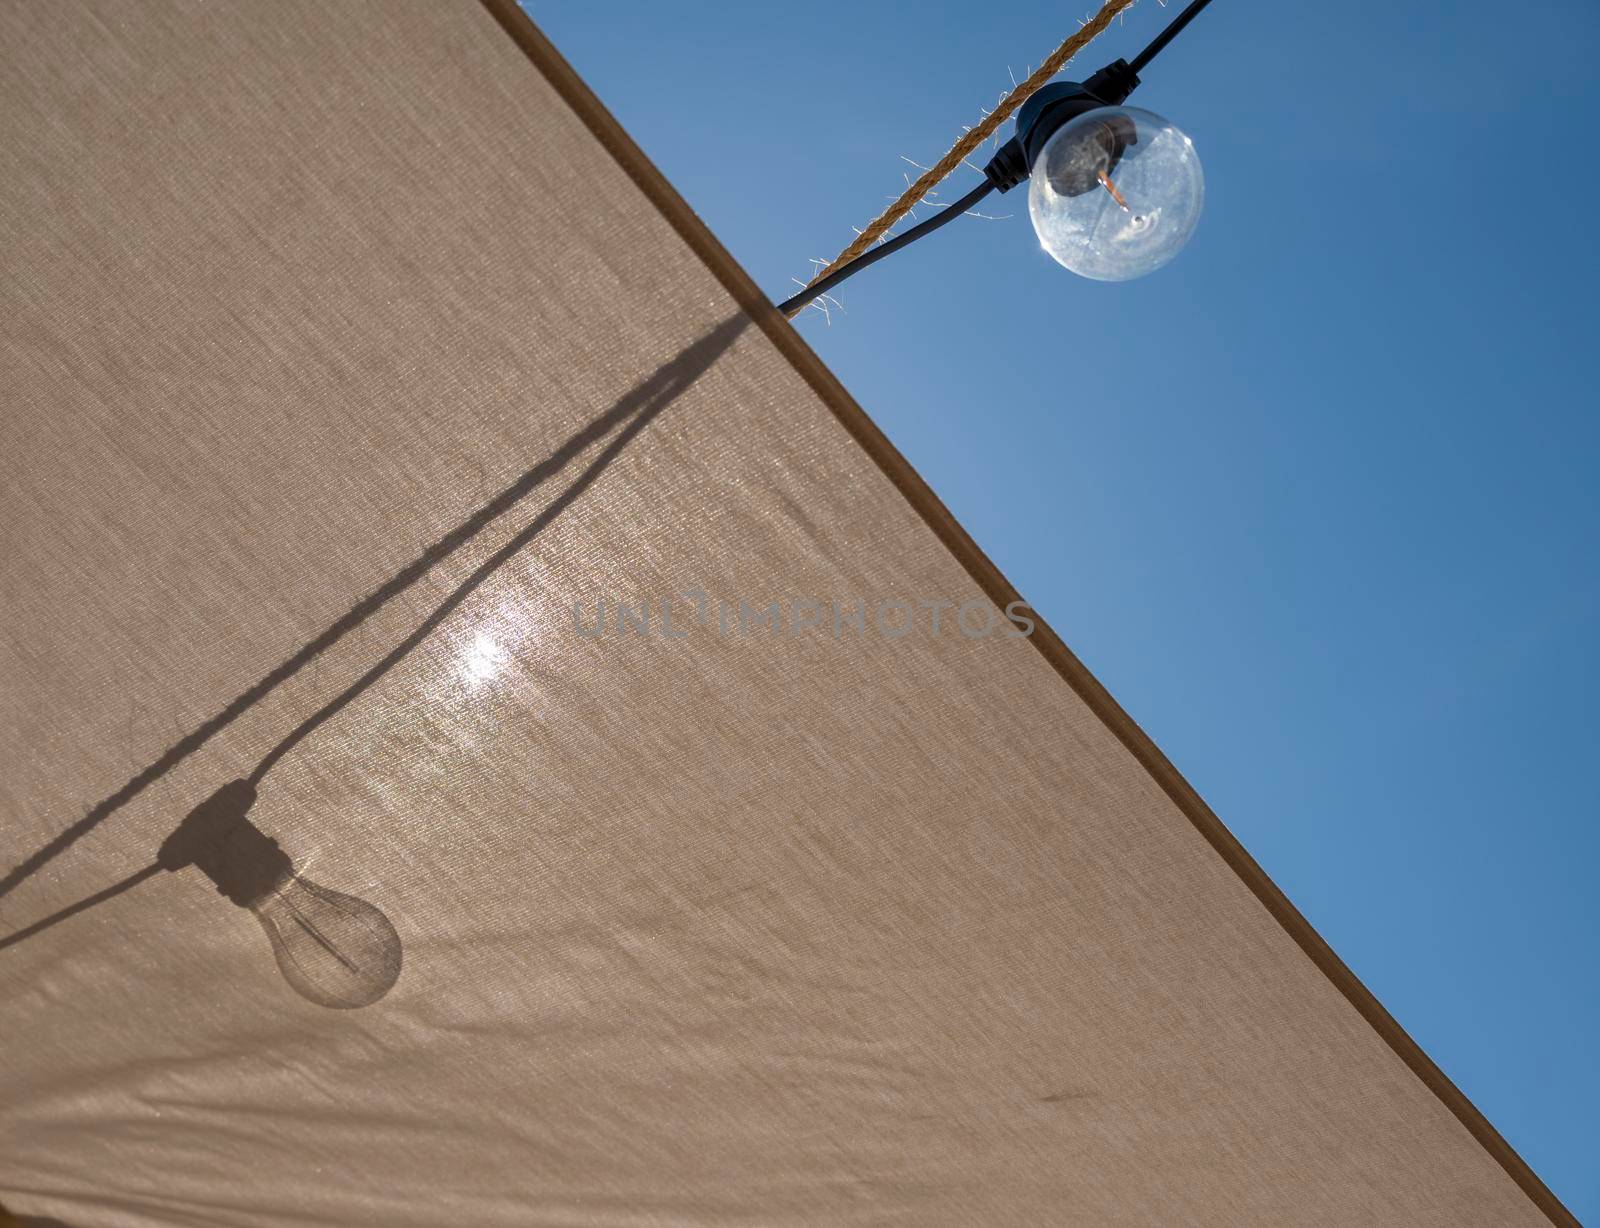 Light Bulb on tent creating shadow against the sun. Energy and ecological transition concept.